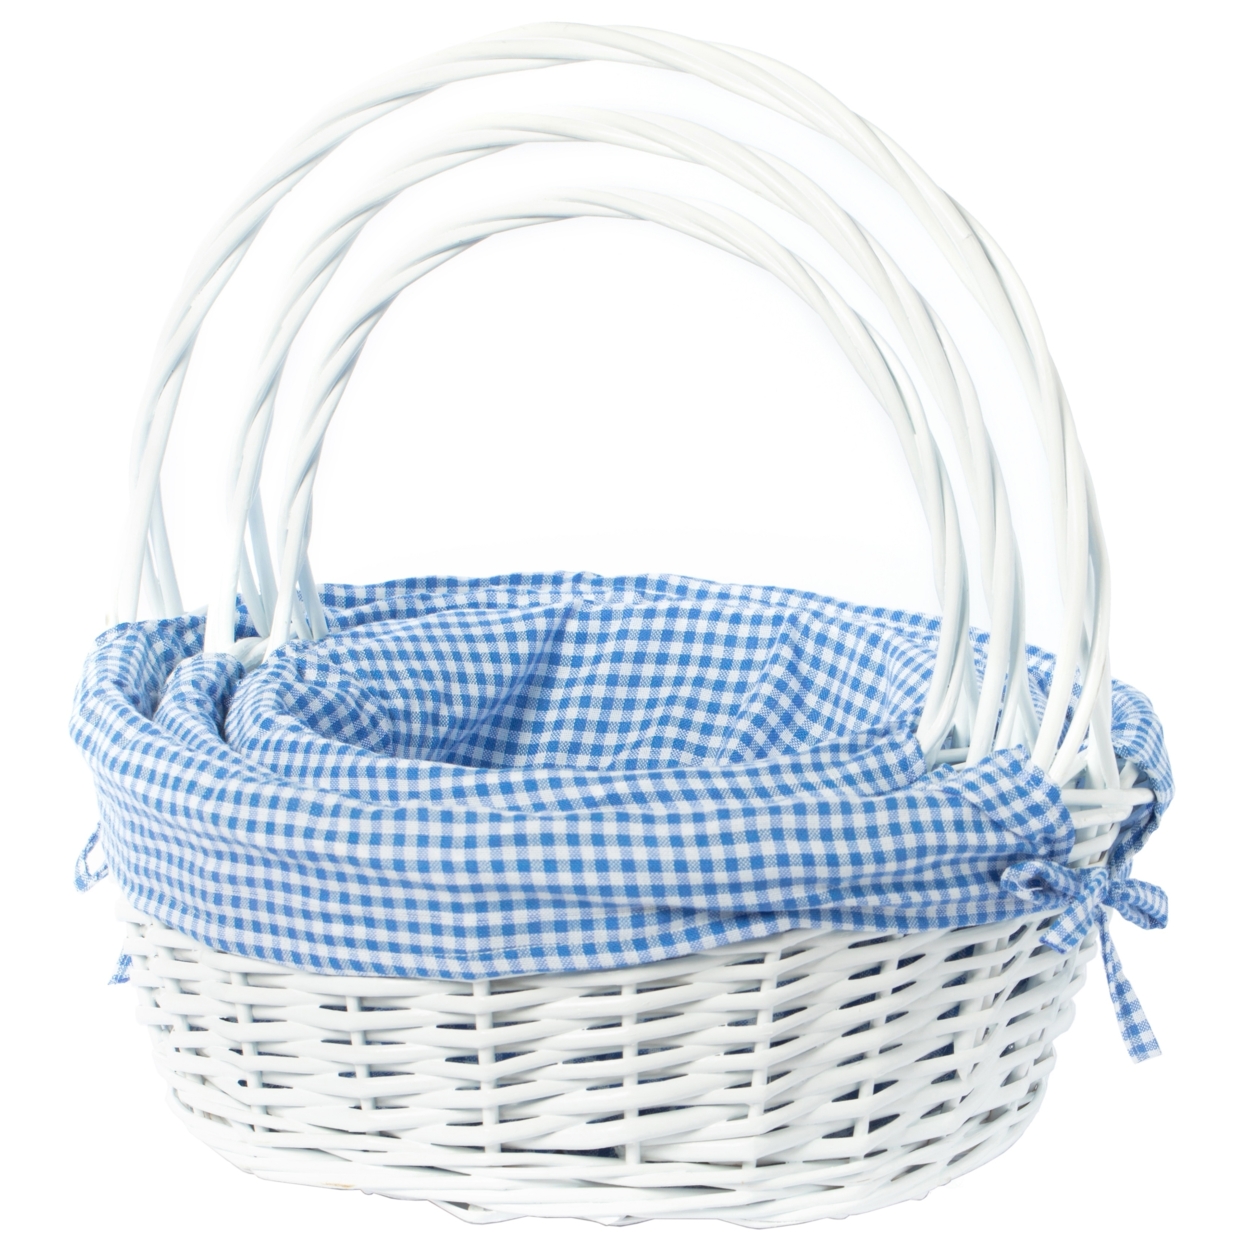 White Round Willow Gift Basket, With Blue And White Gingham Liner And Handles - Pink Large